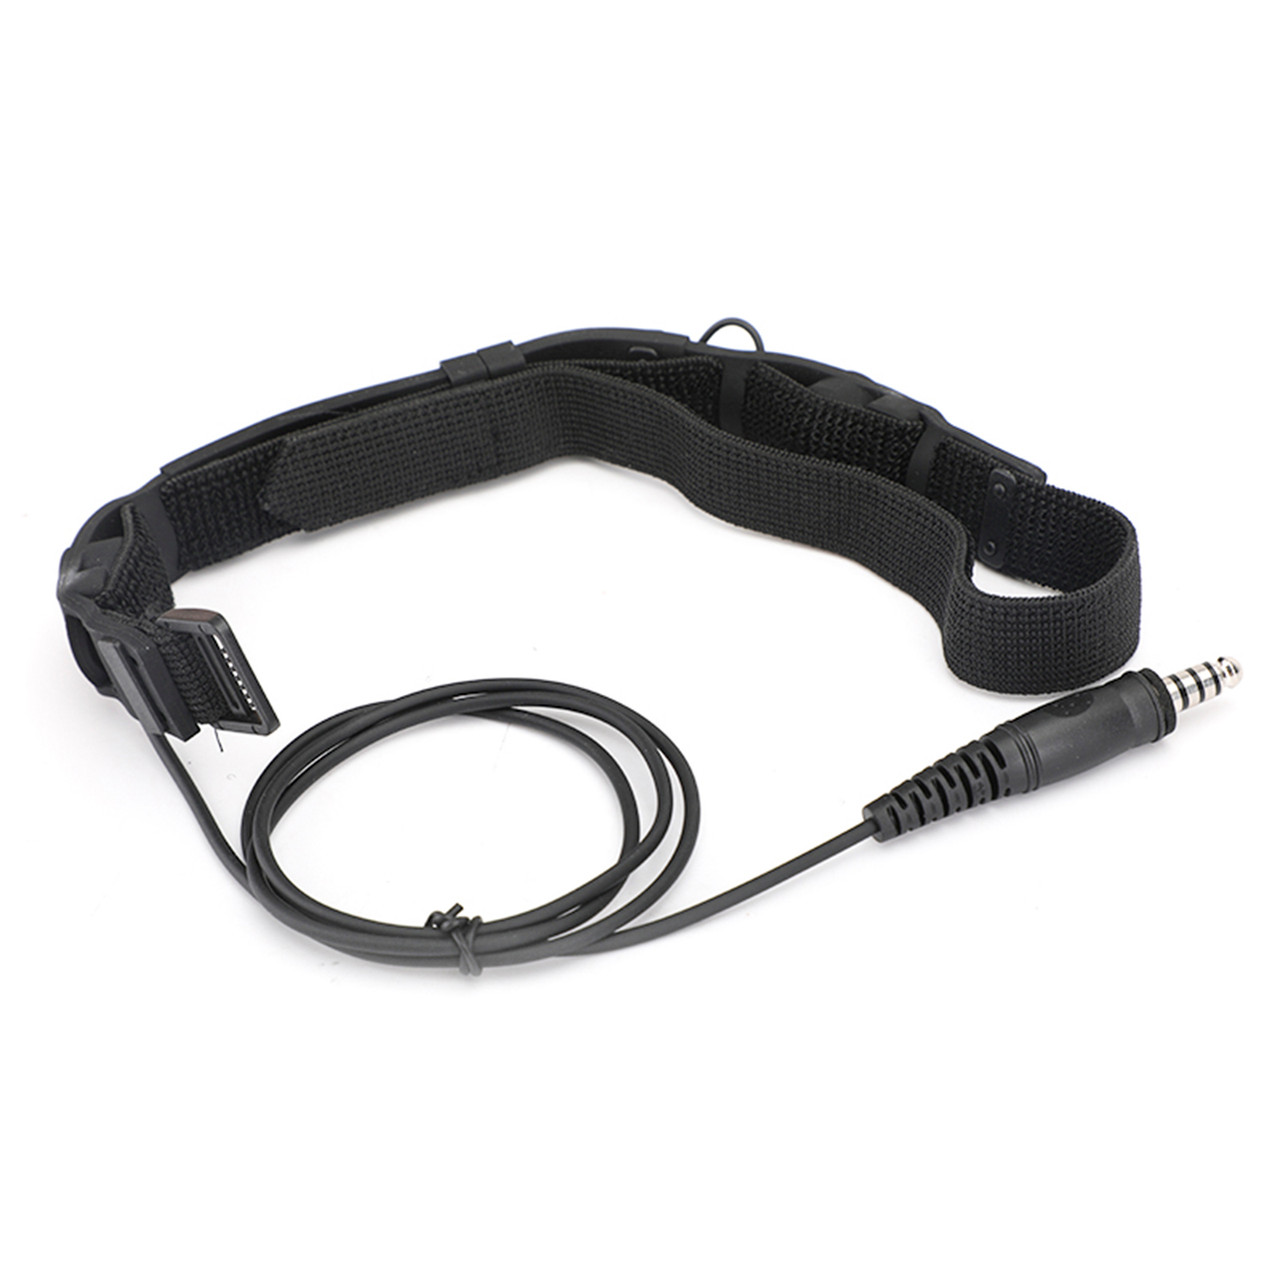 Tactical Throat Tube Mic 7.1mm Plug Headset For Hytera PD780/700/580/788/782/785